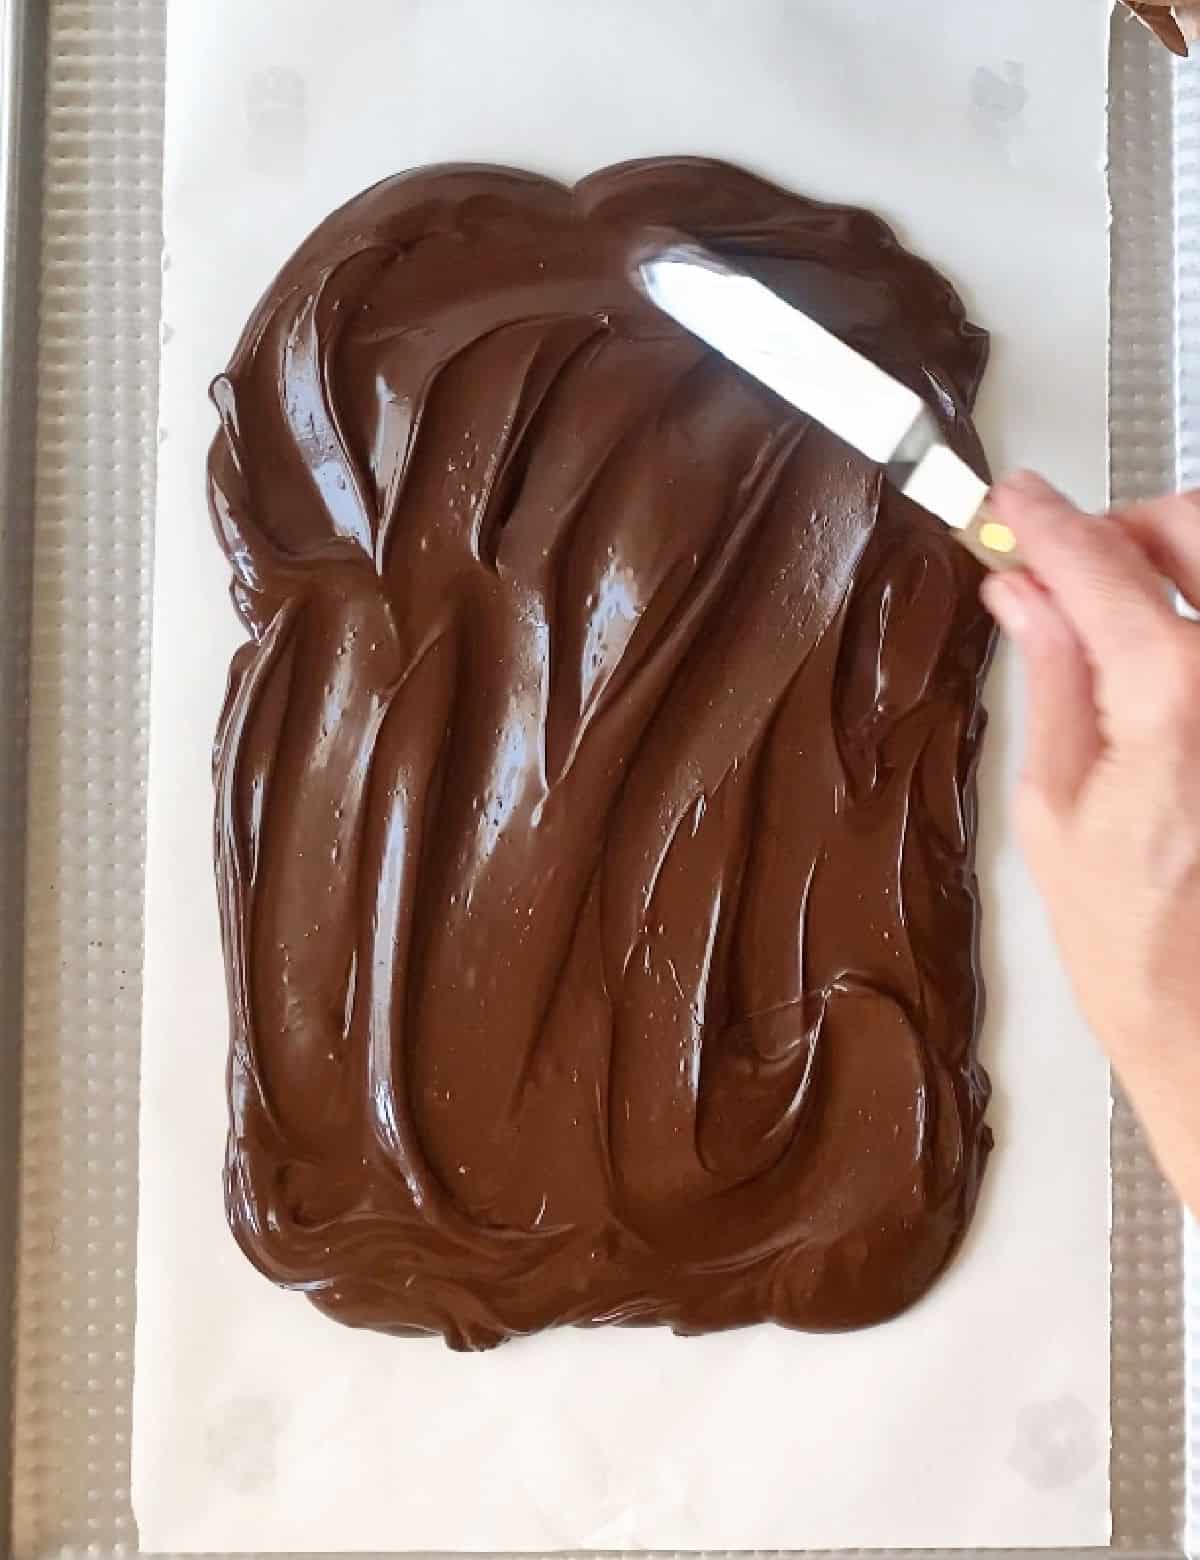 Spreading dark chocolate with an offset spatula on a white piece of paper. Top view.